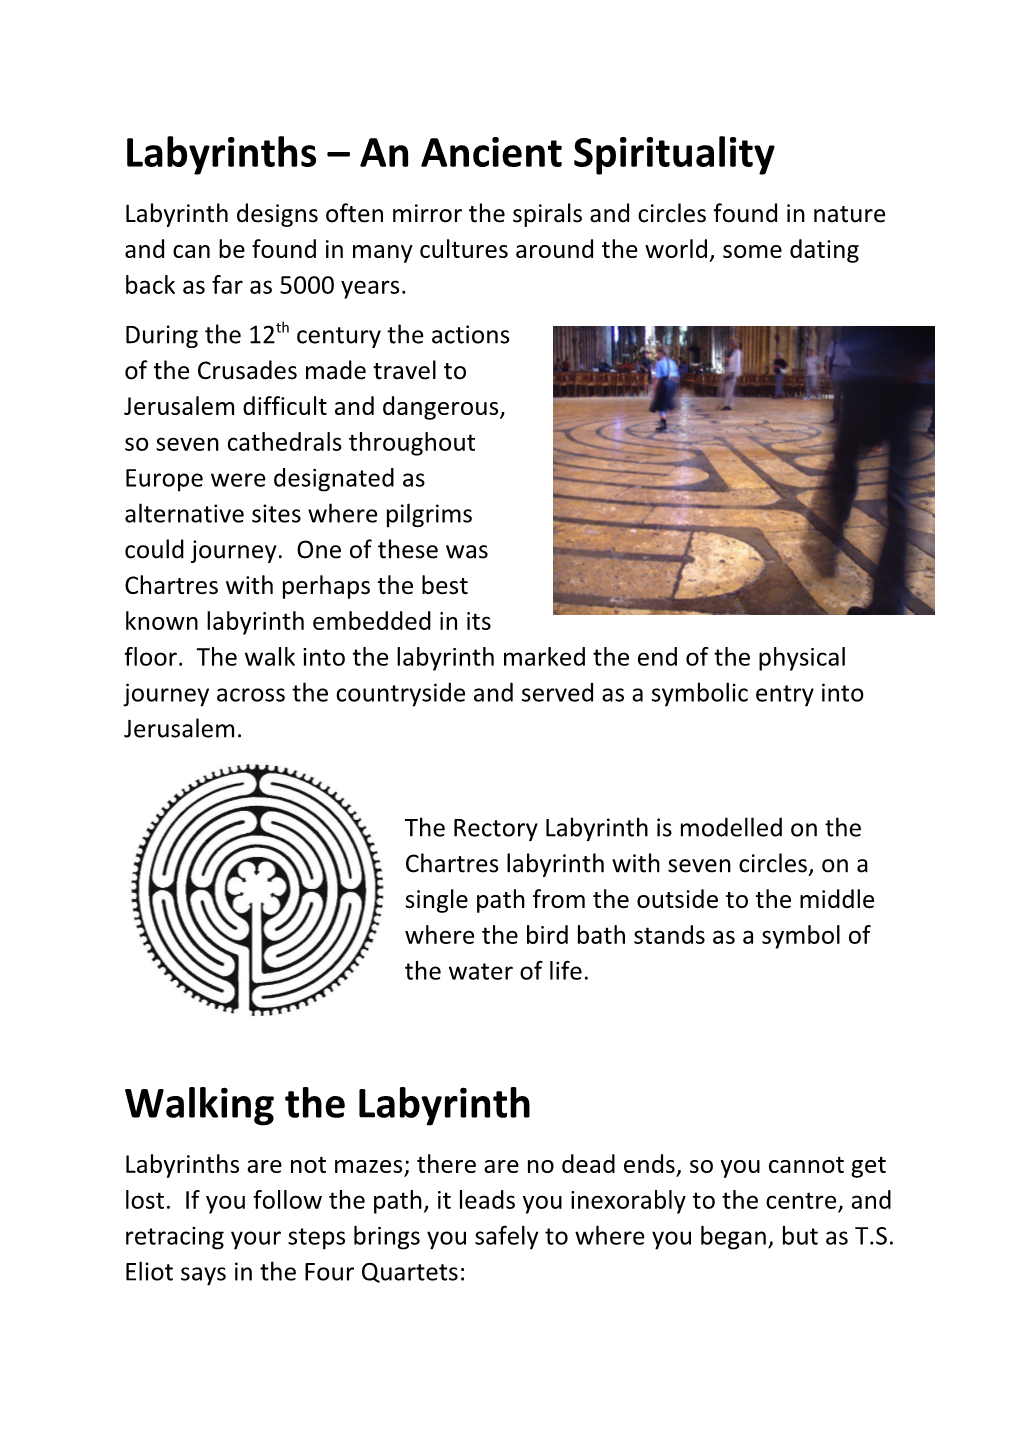 Walking the Rectory Labyrinth